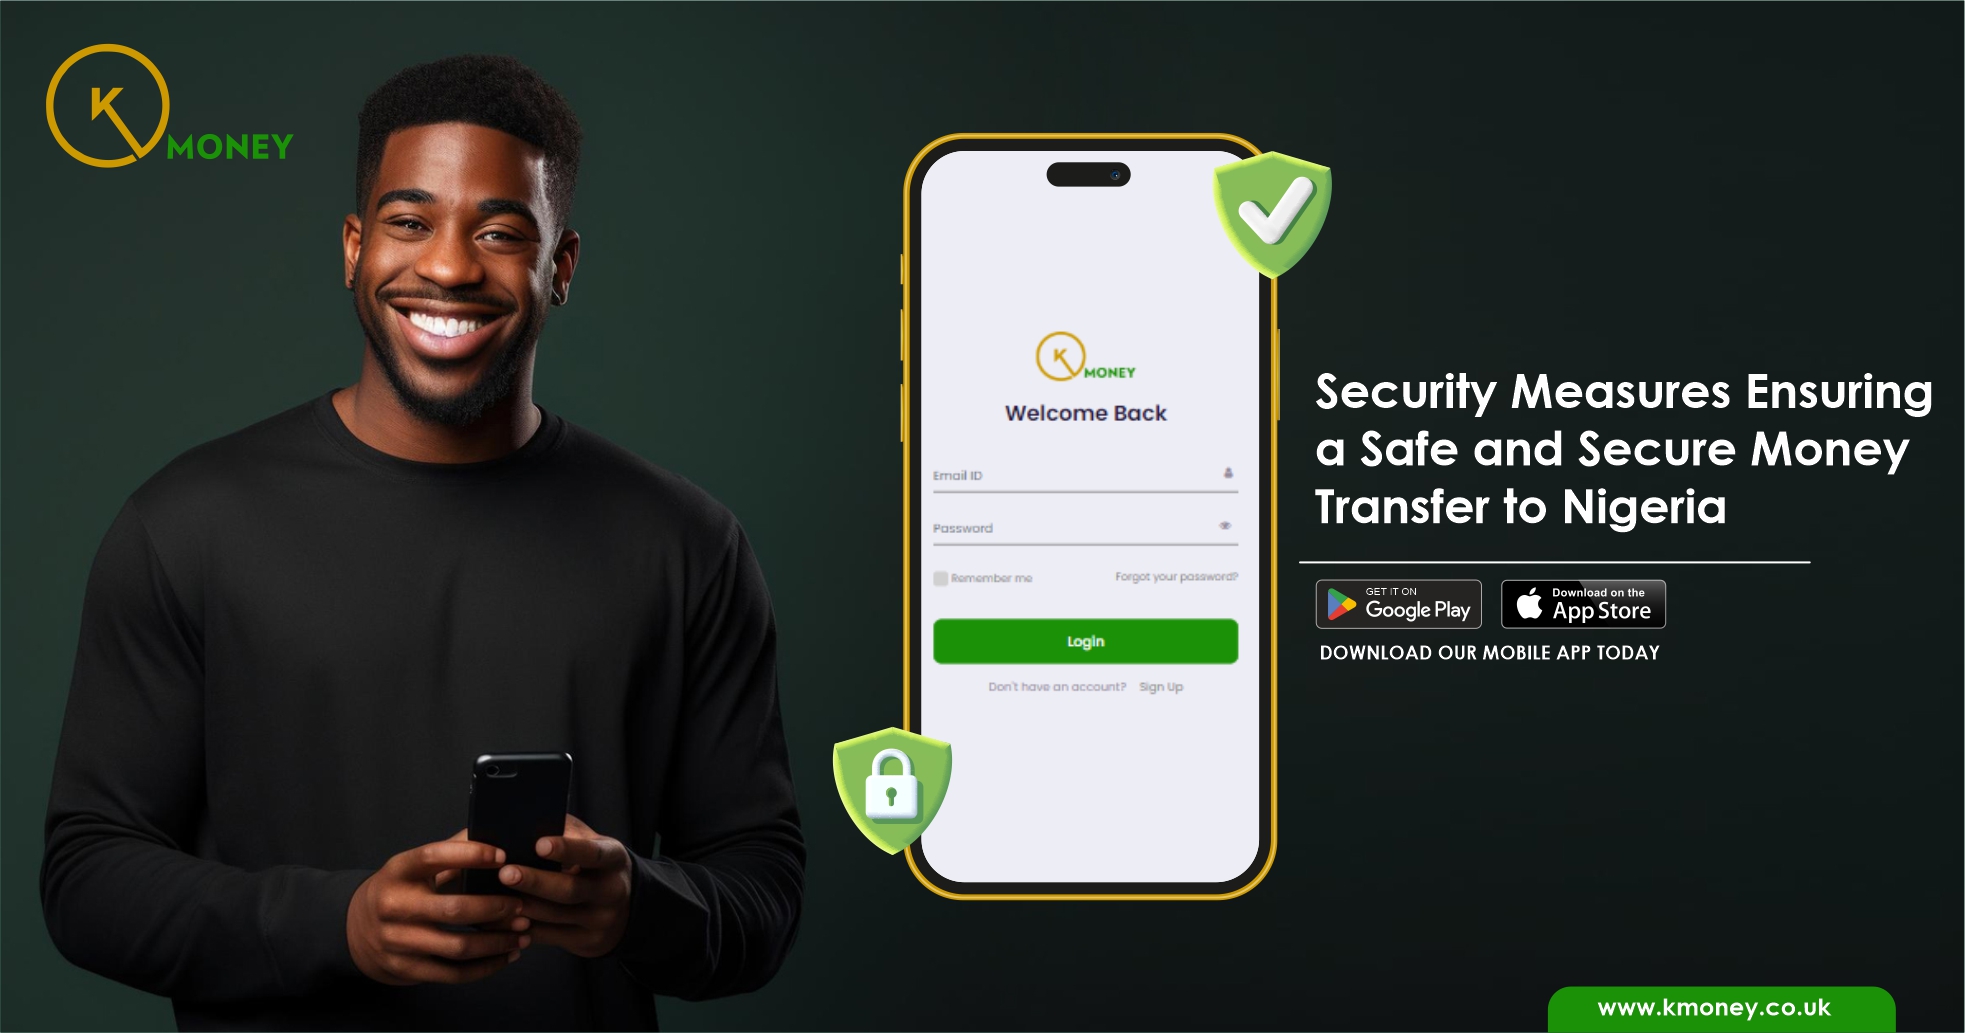 Security Measures Ensuring a Safe and Secure Money Transfer to Nigeria